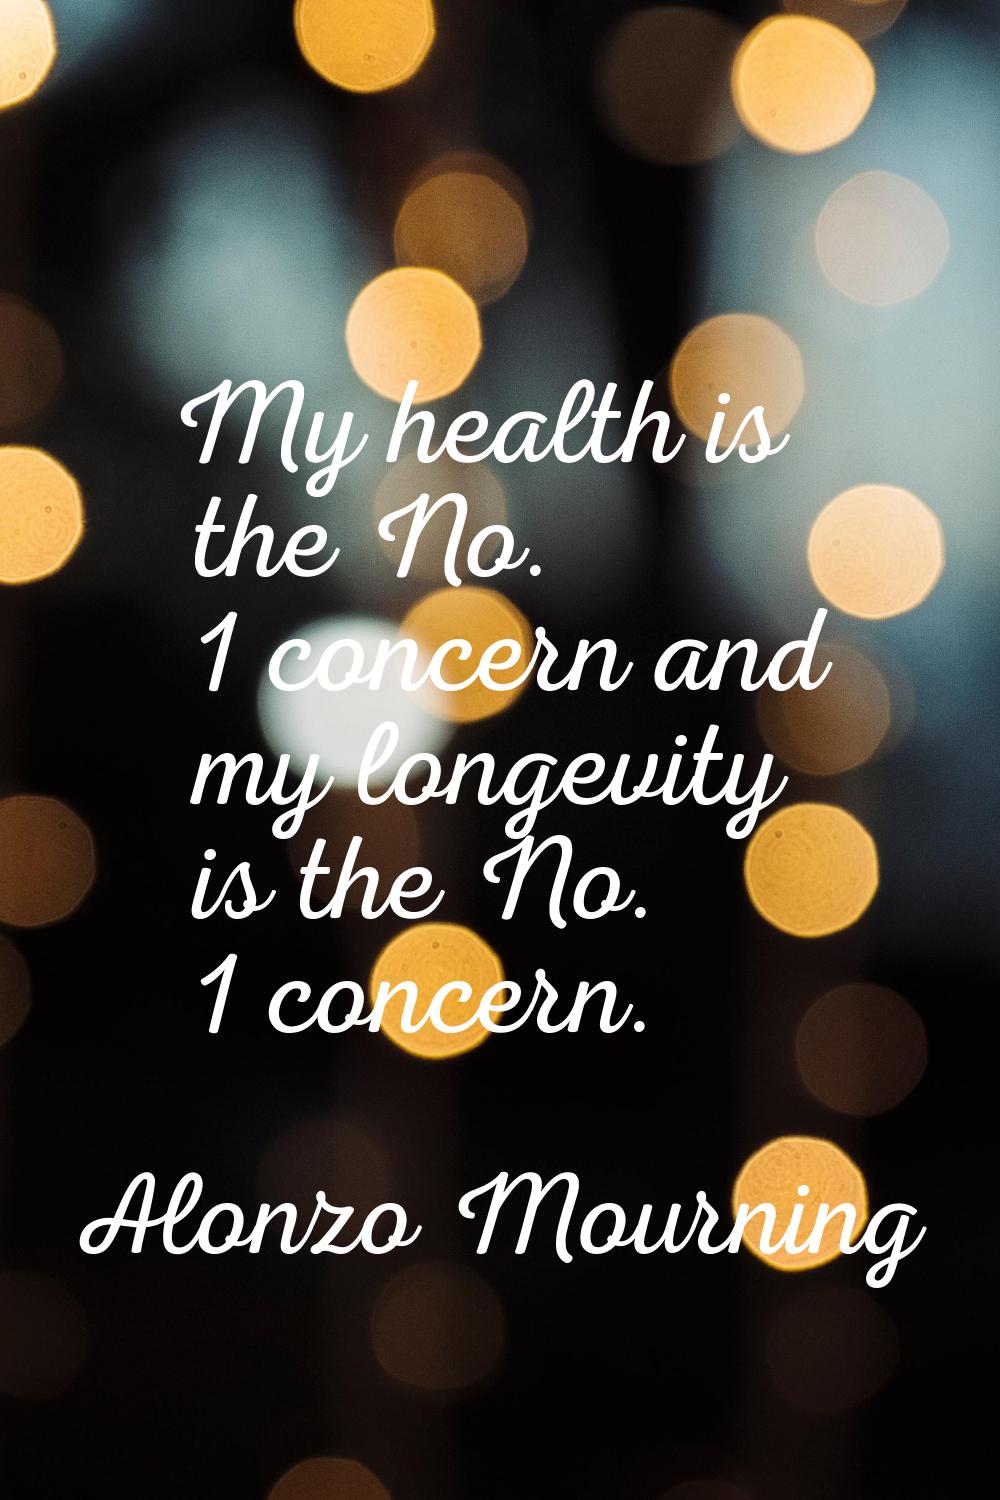 My health is the No. 1 concern and my longevity is the No. 1 concern.